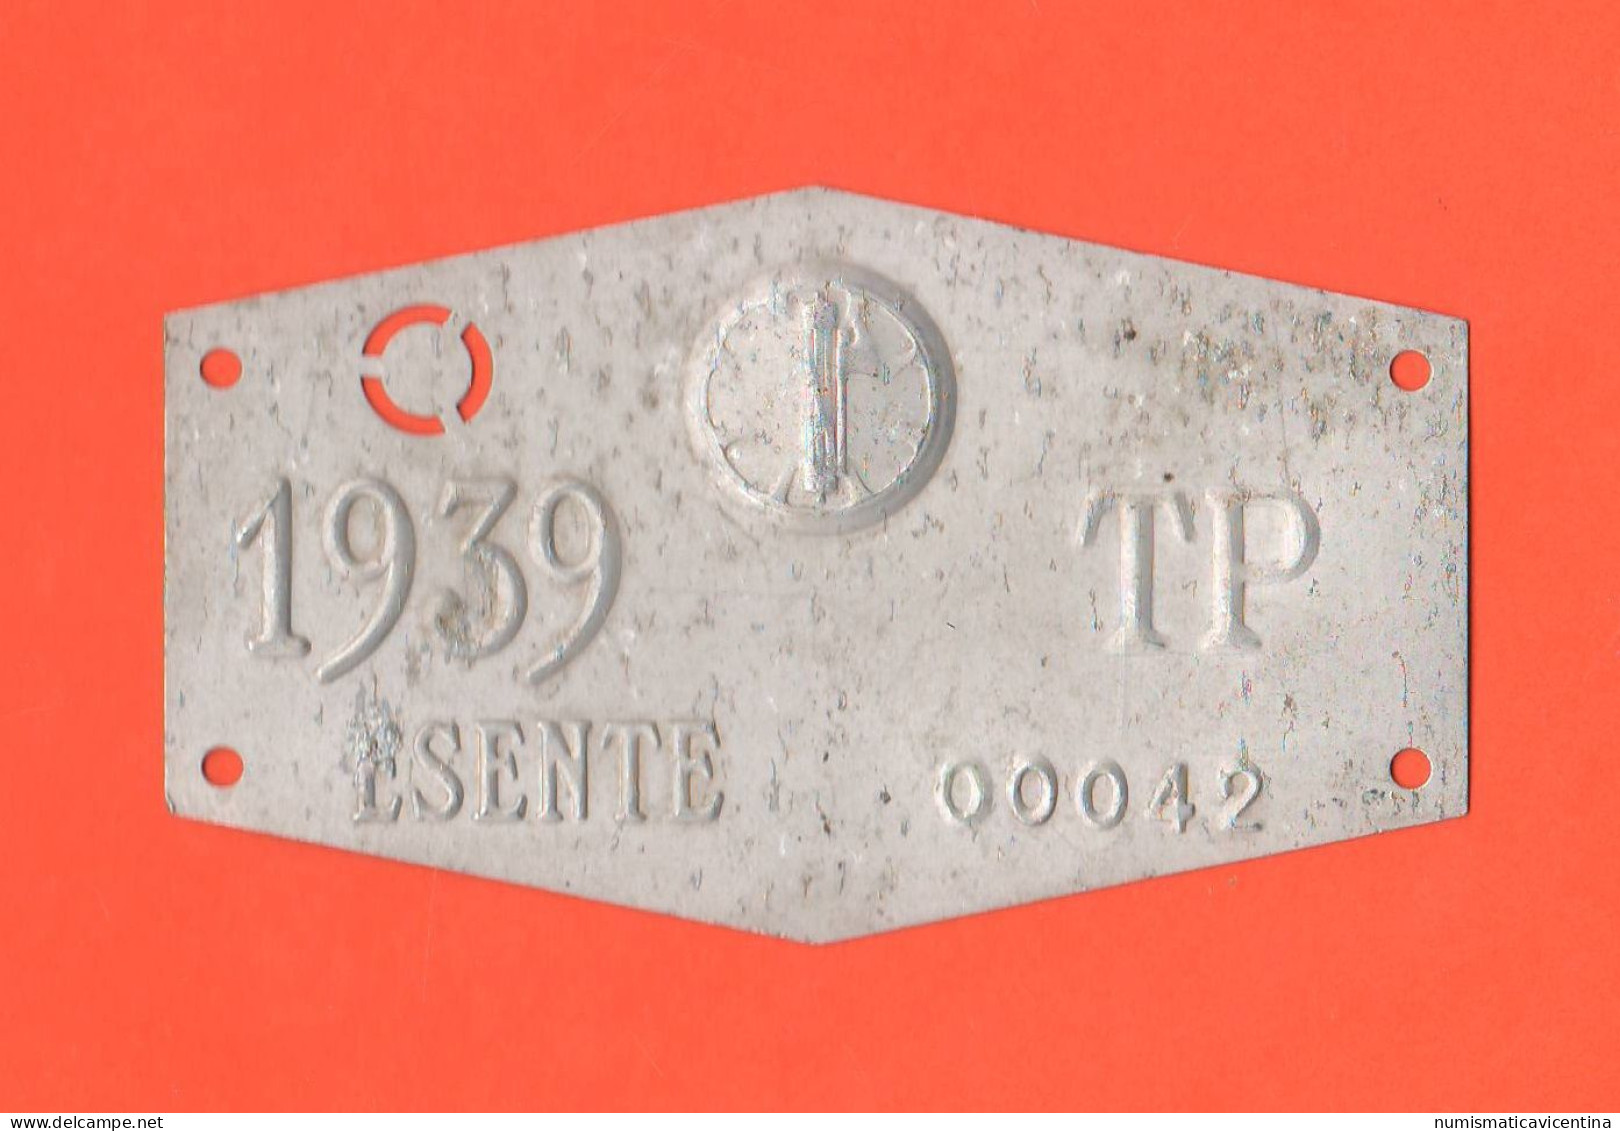 Esenzione Tassa Bollo 1939 Ventennio Fascismo Exemption From Tax Agricultural Vehicles During The Fascist Period - Number Plates